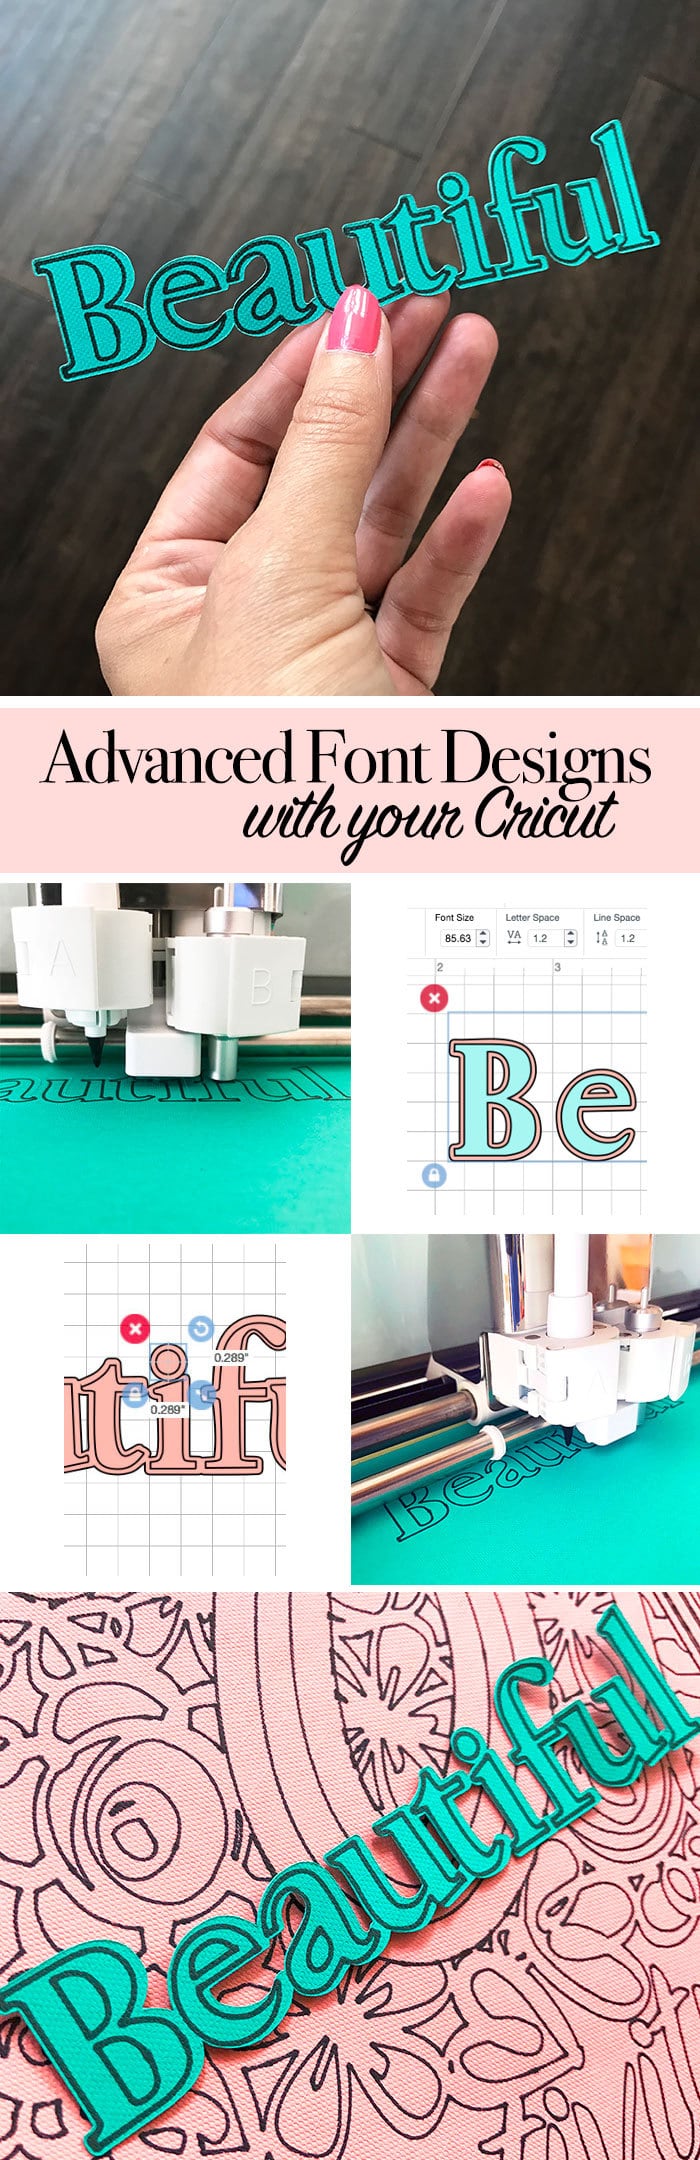 Make advanced font designs with your Cricut